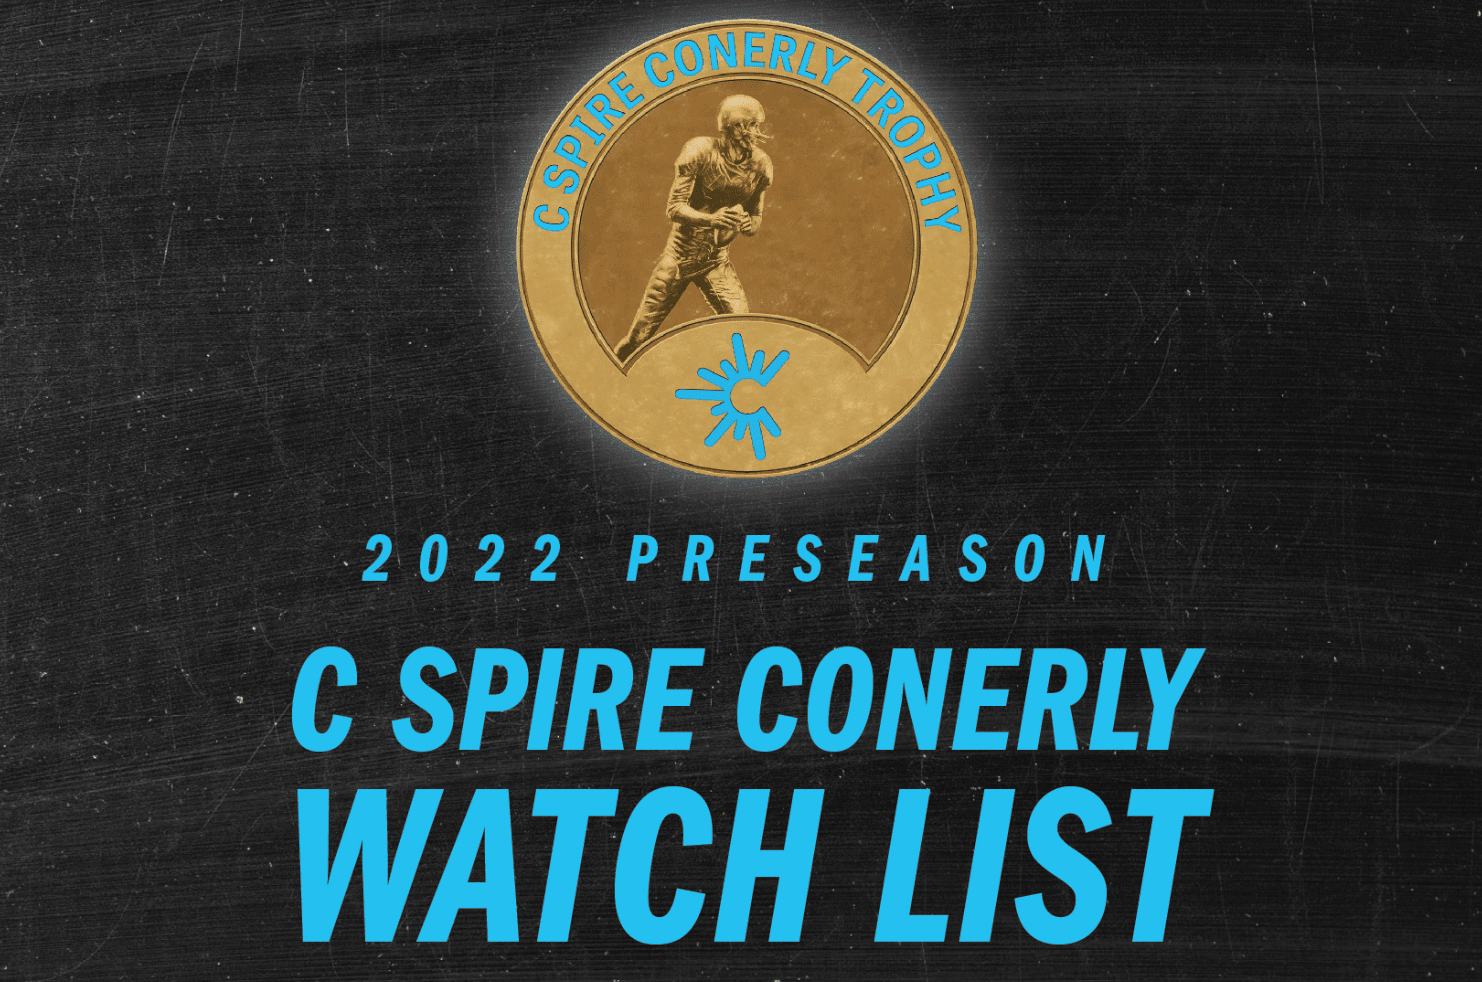 Conerly Trophy watchlist announced by Mississippi Sports Hall of Fame